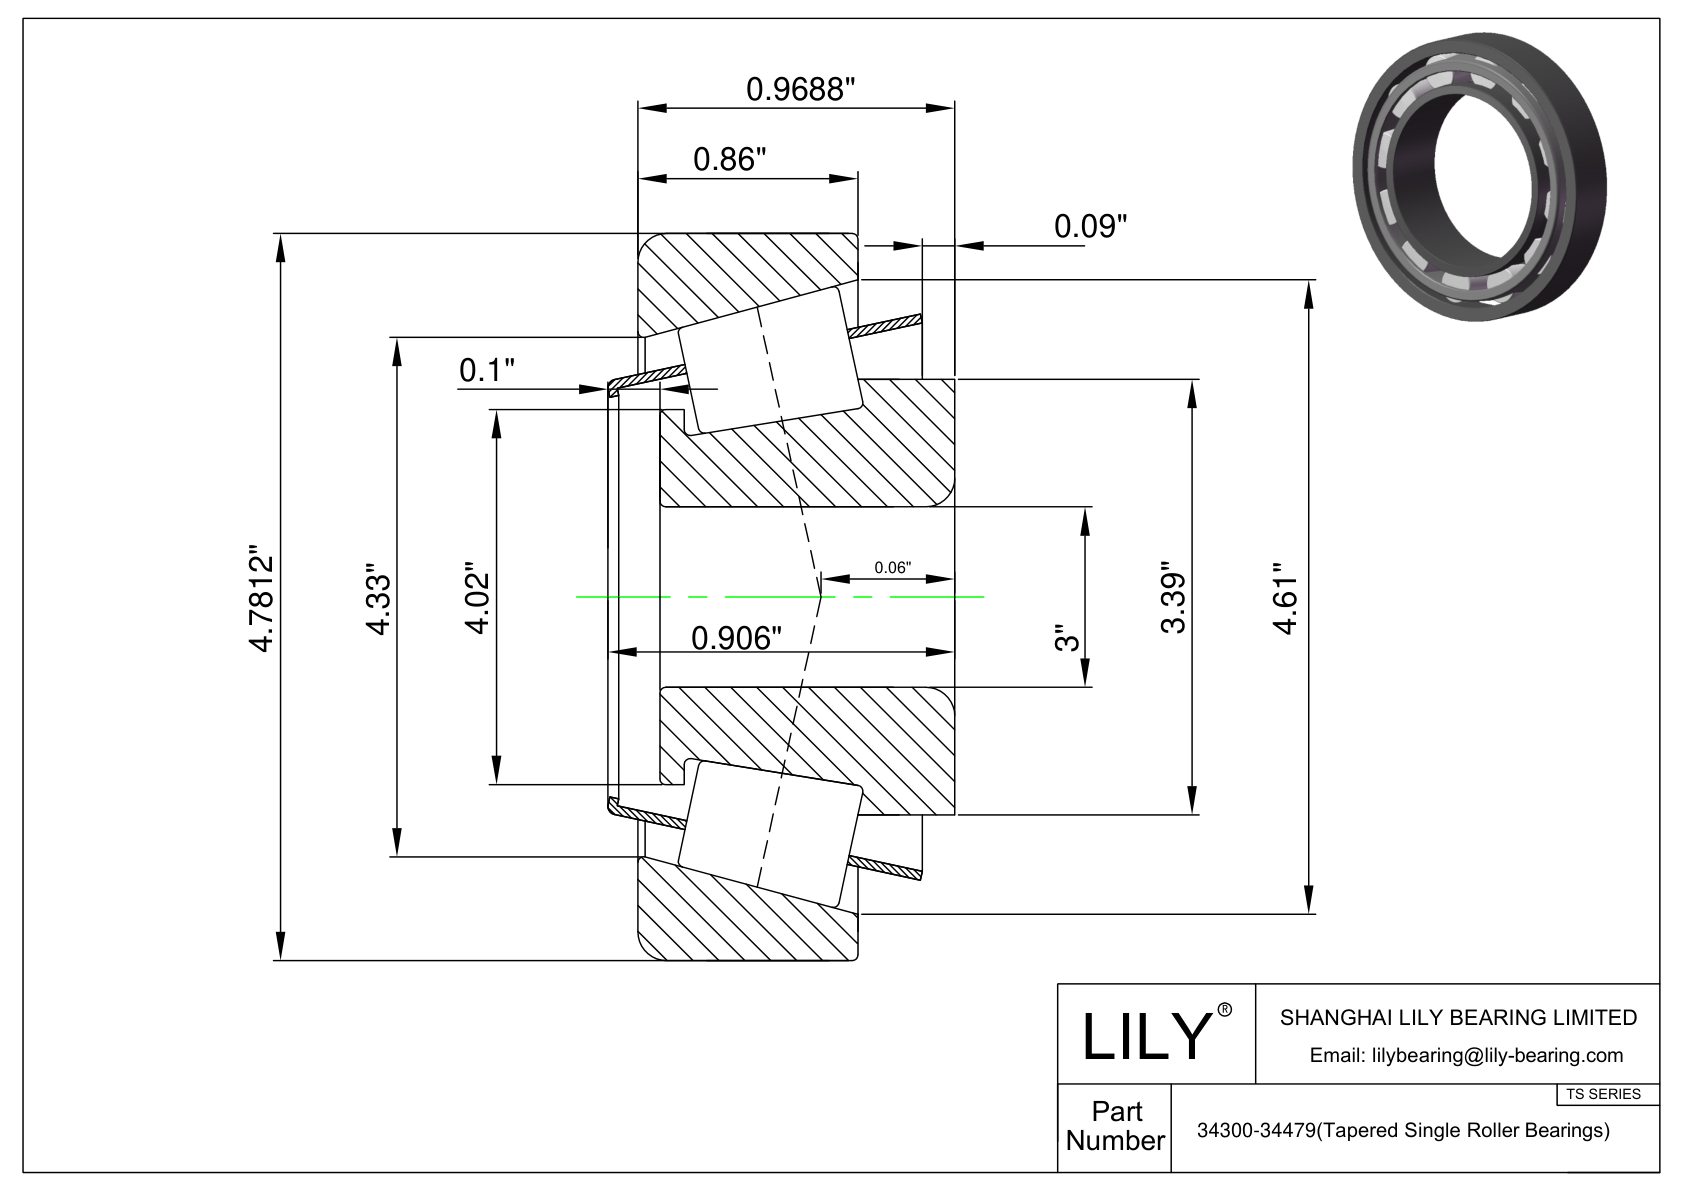 34300-34479 TS (Tapered Single Roller Bearings) (Imperial) cad drawing